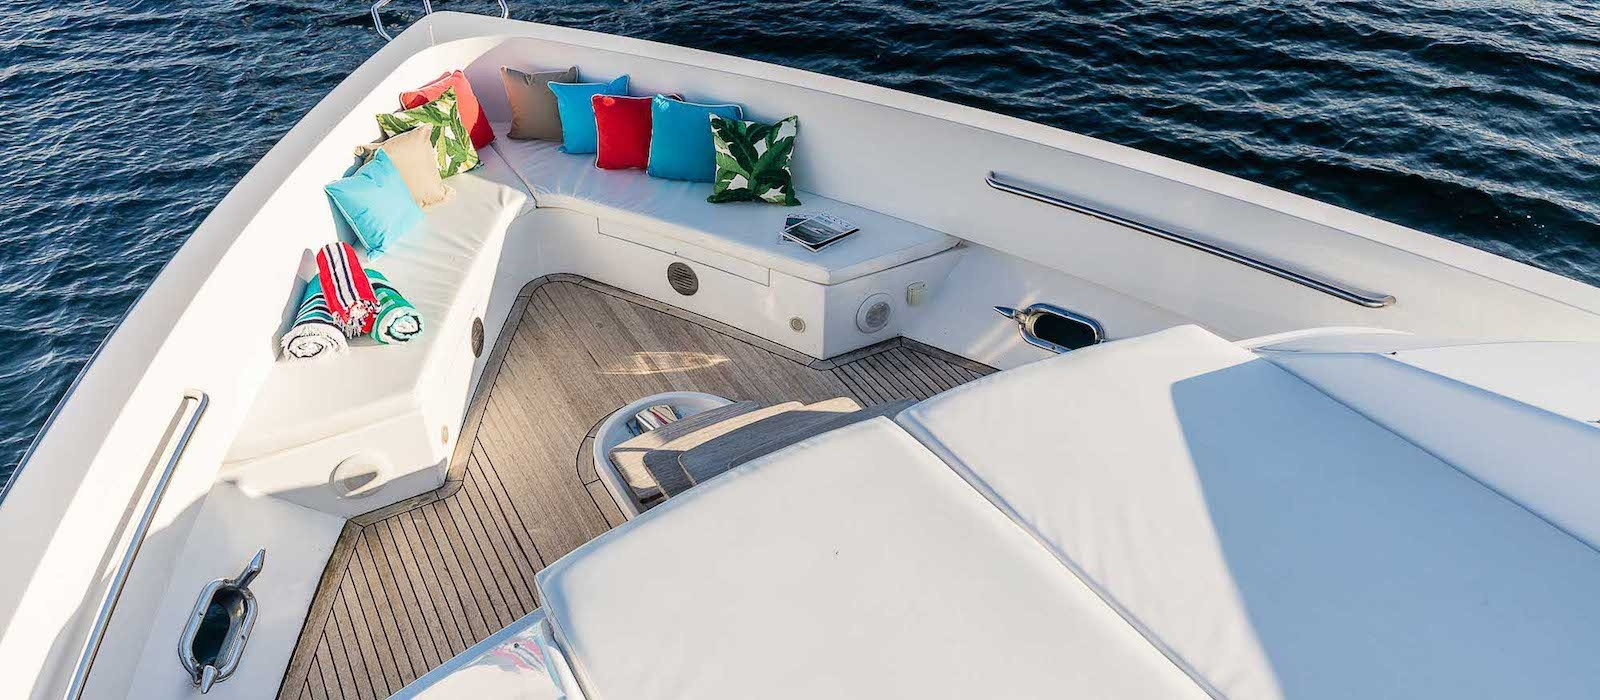 Bow lounges on AQA super yacht hire